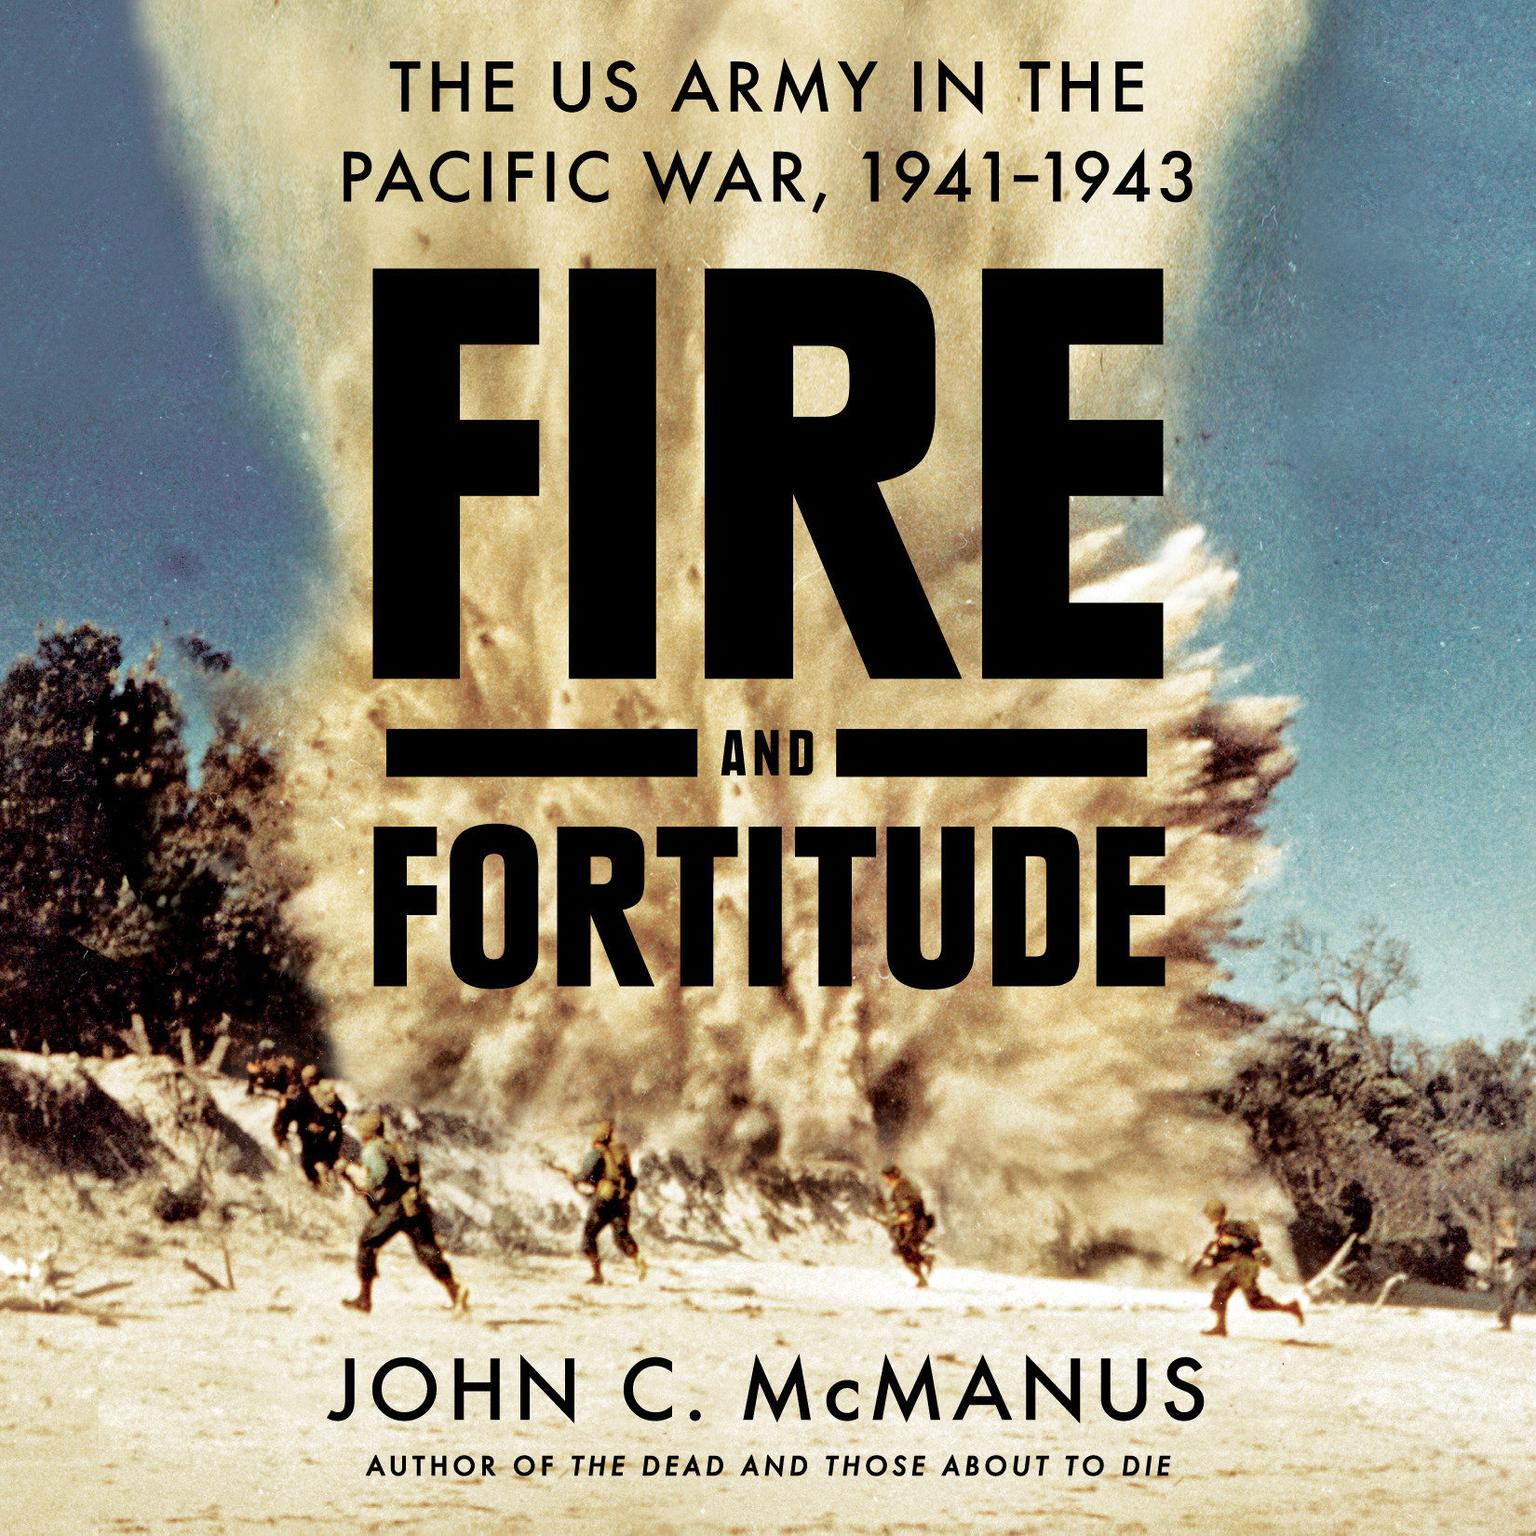 Fire and Fortitude: The US Army in the Pacific War, 1941-1943 Audiobook, by John C. McManus